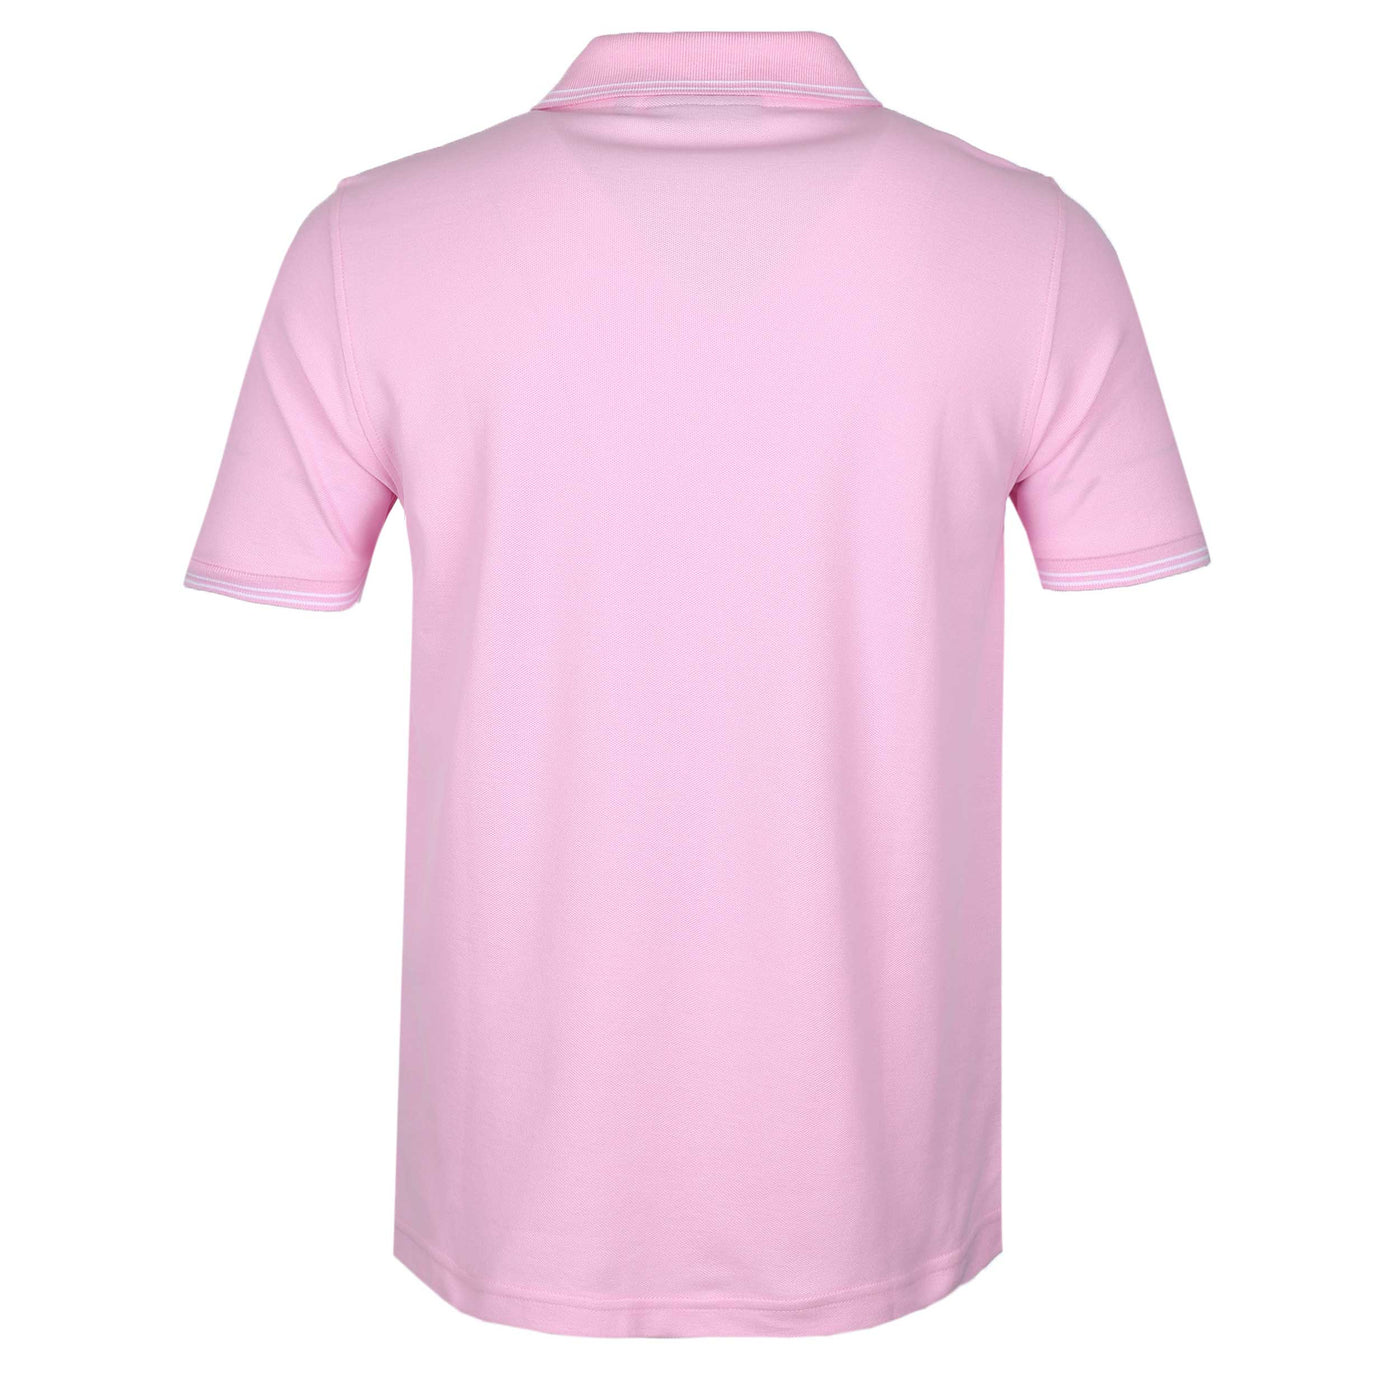 Psycho Bunny Speed Pique Polo Shirt in Pure Pink